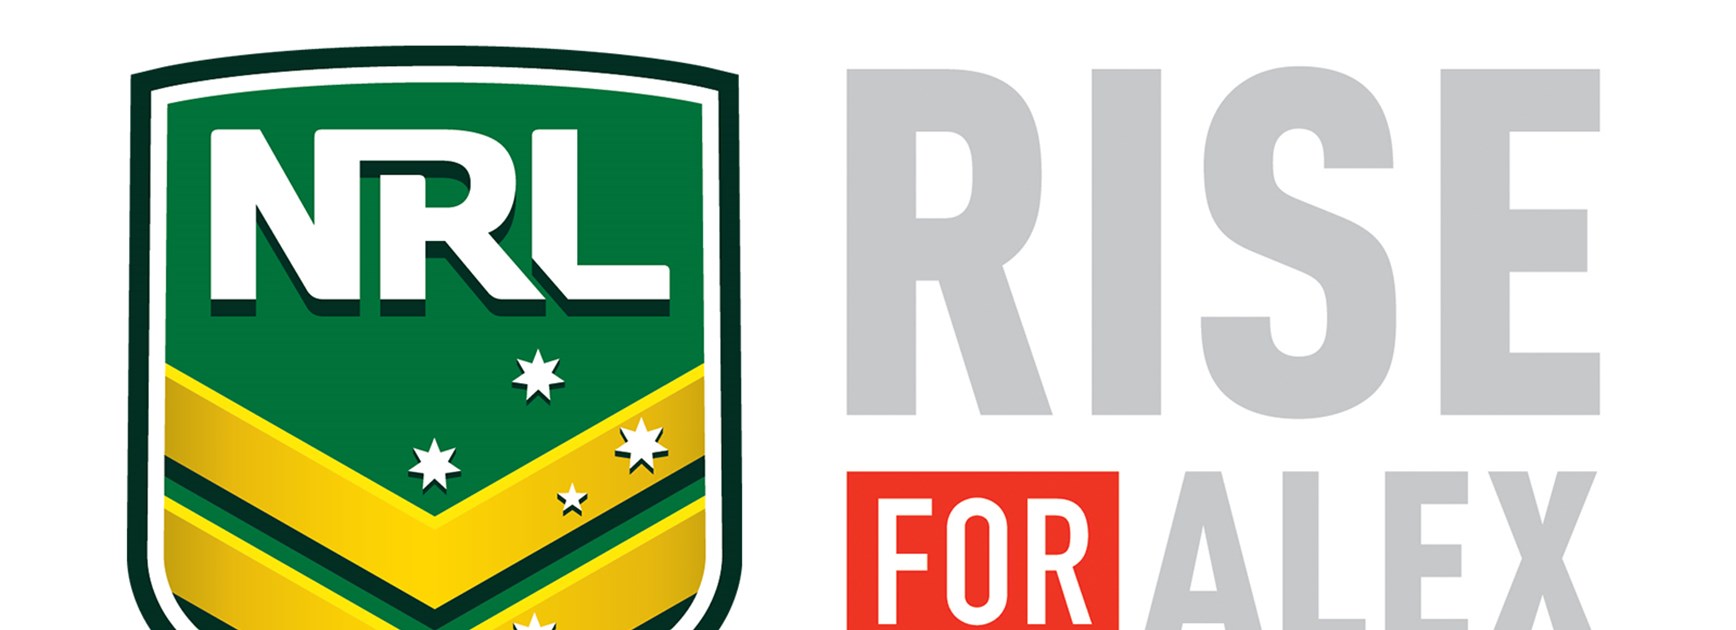 The NRL supports the NRL Foundation and the RiseForAlex Foundation.